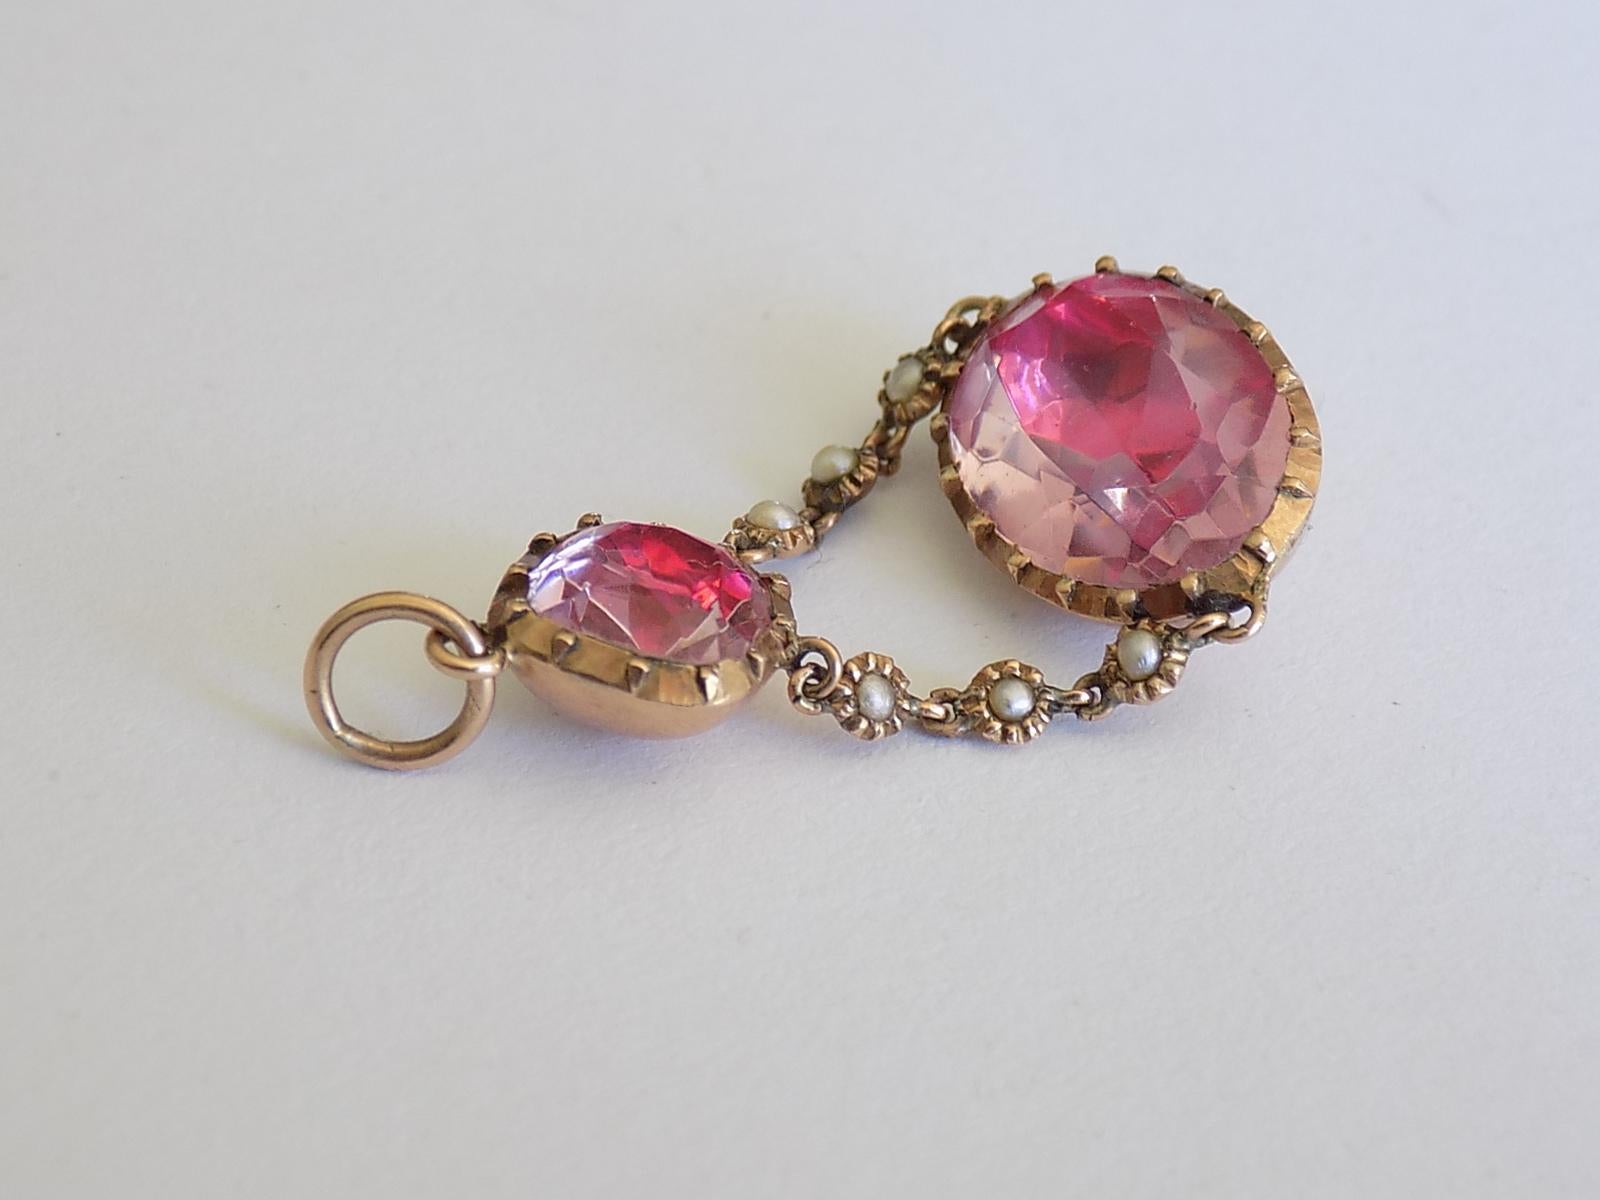 A Lovely Georgian c.1800 ( Carat Gold, split Pearl and Pink Topaz paste (glass) pendant. The paste in foil closed back setting. English origin. Rare find.
Drop 37mm, width 20mm.
Weight 3.7gr.
Unmarked, tested 9 carat gold.